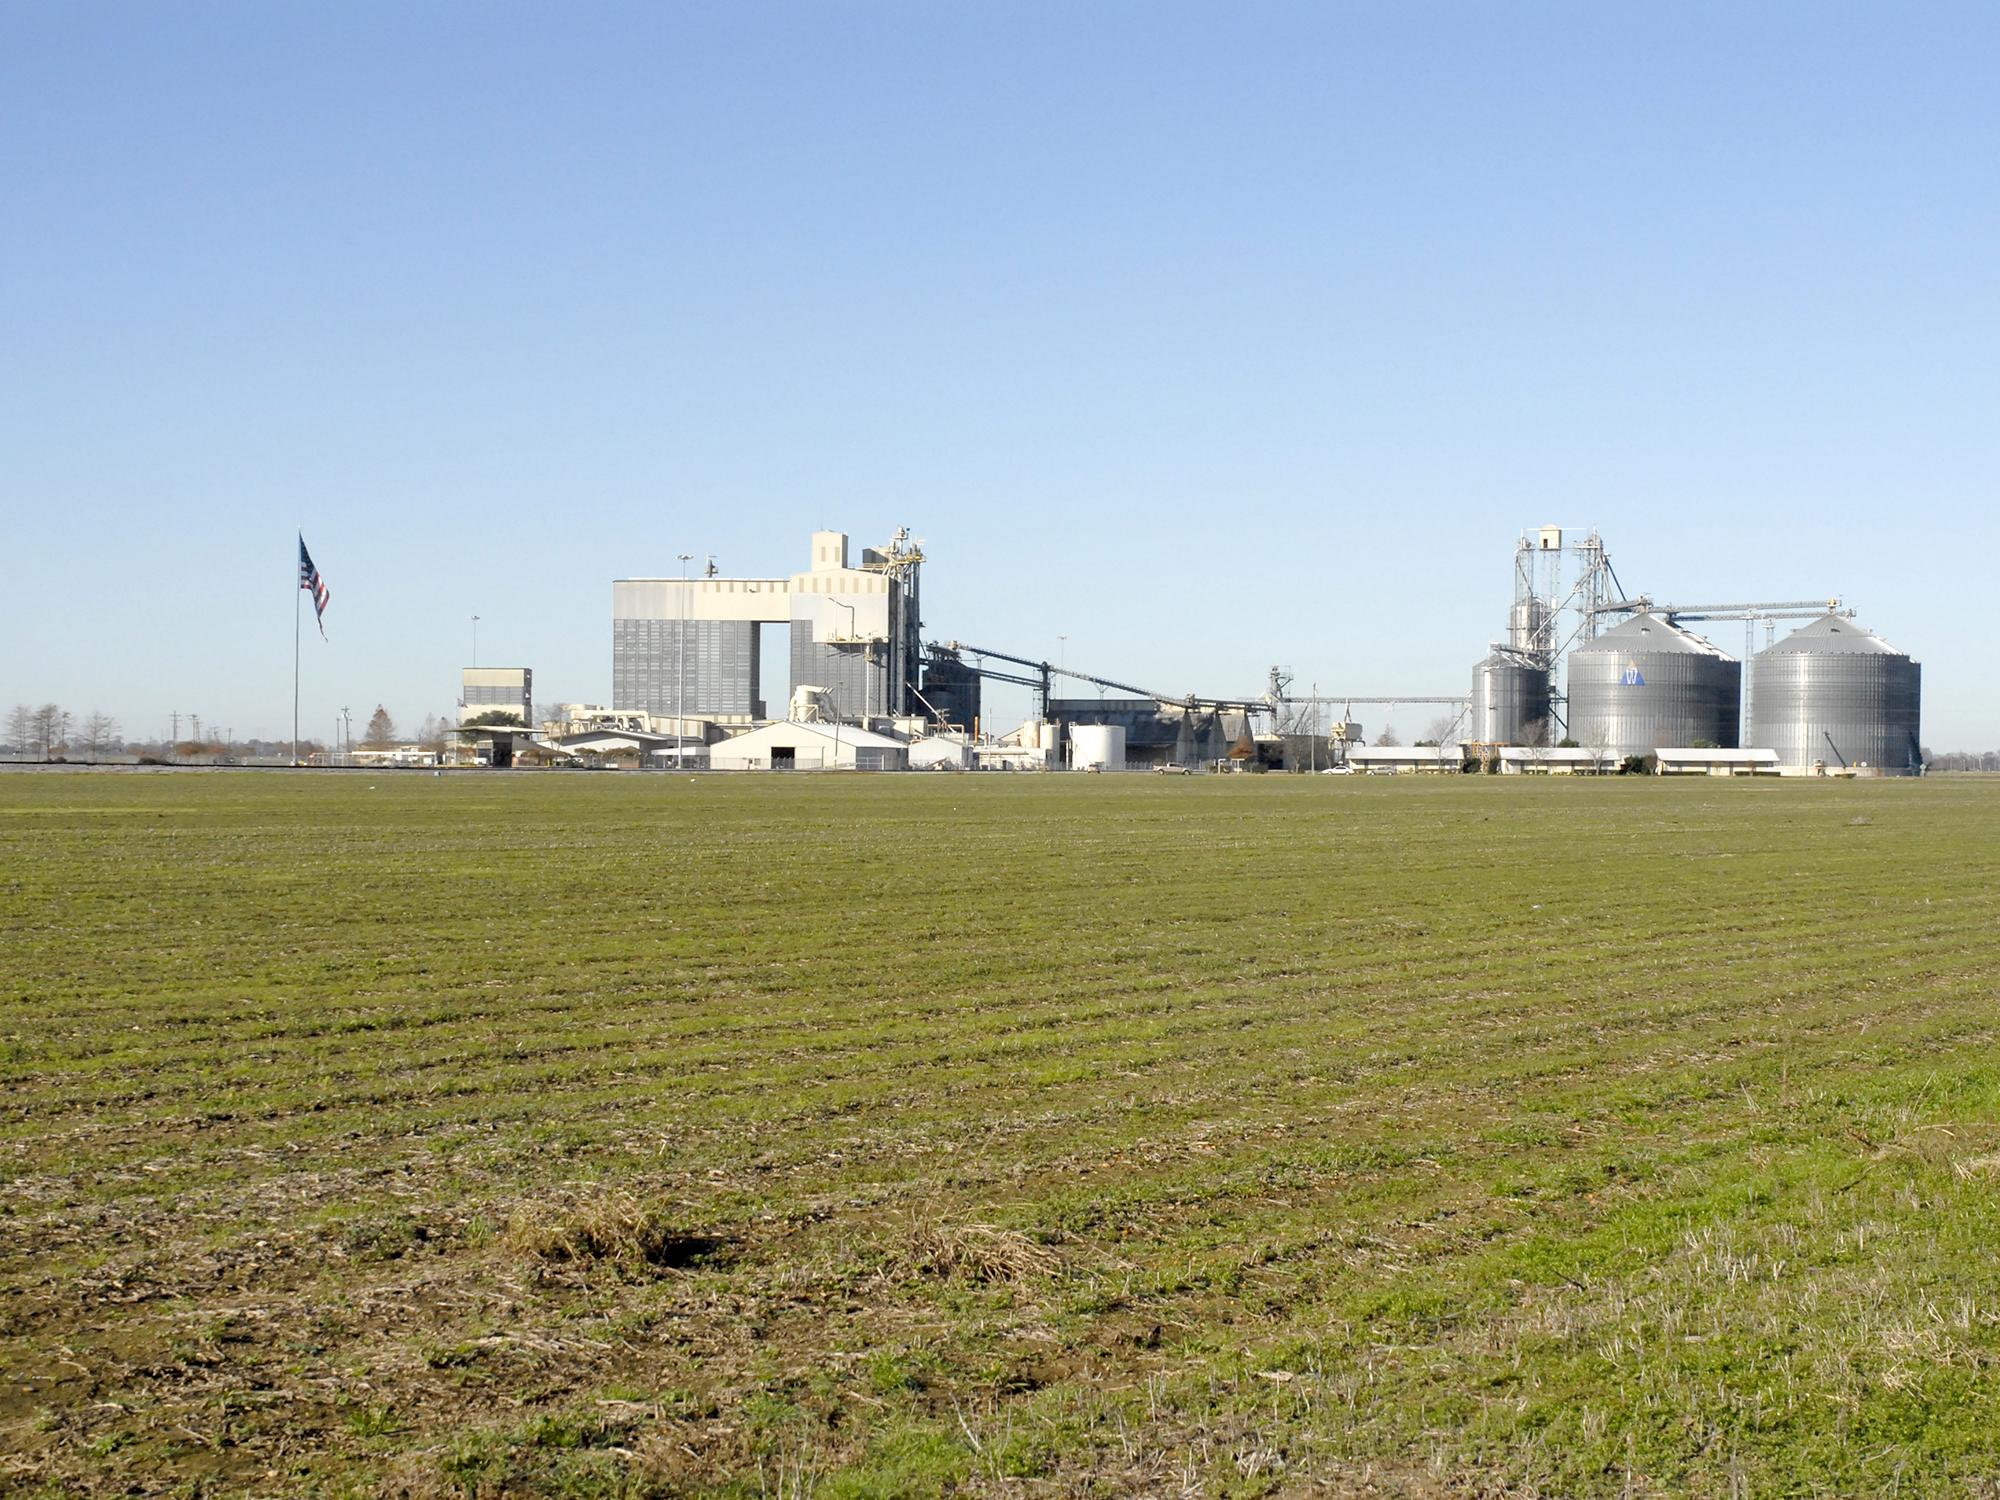 Storage facilities, such as this grain elevator in Sunflower County seen on Dec. 15, 2015, are busy as Mississippi’s 2015 harvest is complete. Agriculture brought an estimated value of $7.4 billion to the state. (Photo by MSU Extension Service/Bonnie Coblentz)